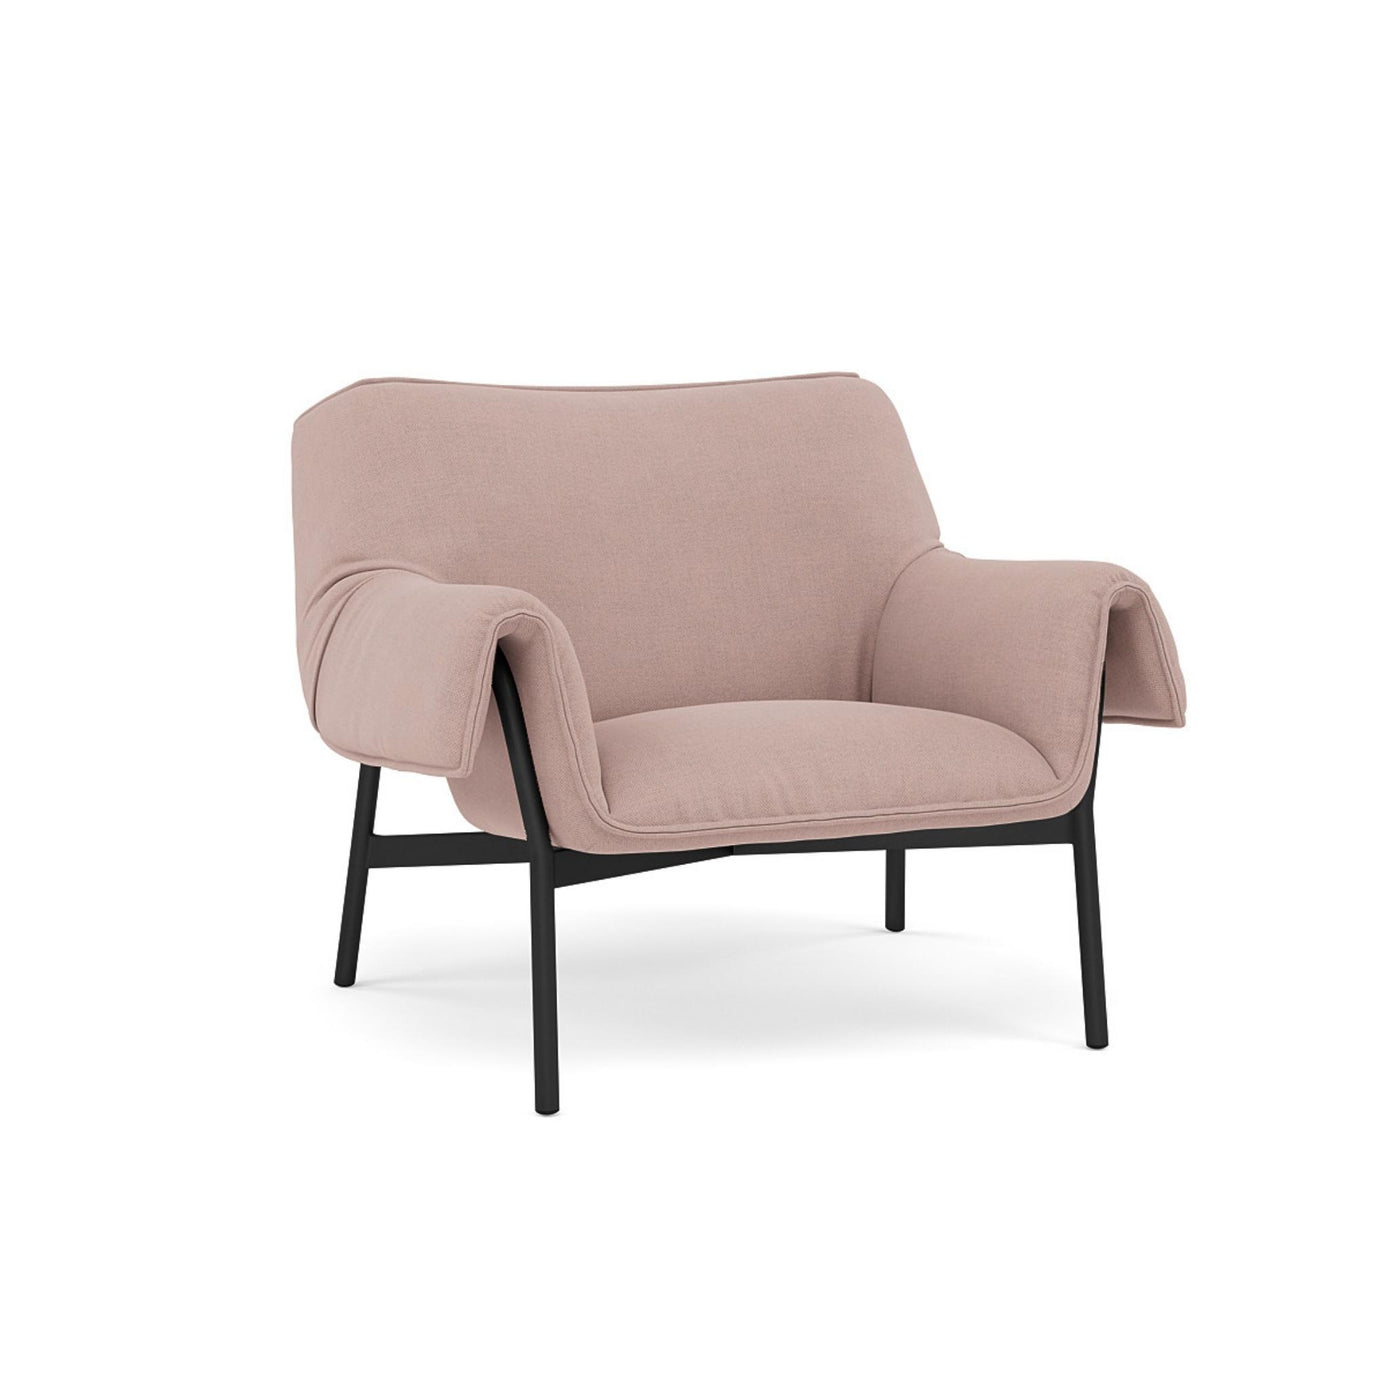 Muuto Wrap Lounge Chair. Made to order from someday designs. #colour_fiord-551